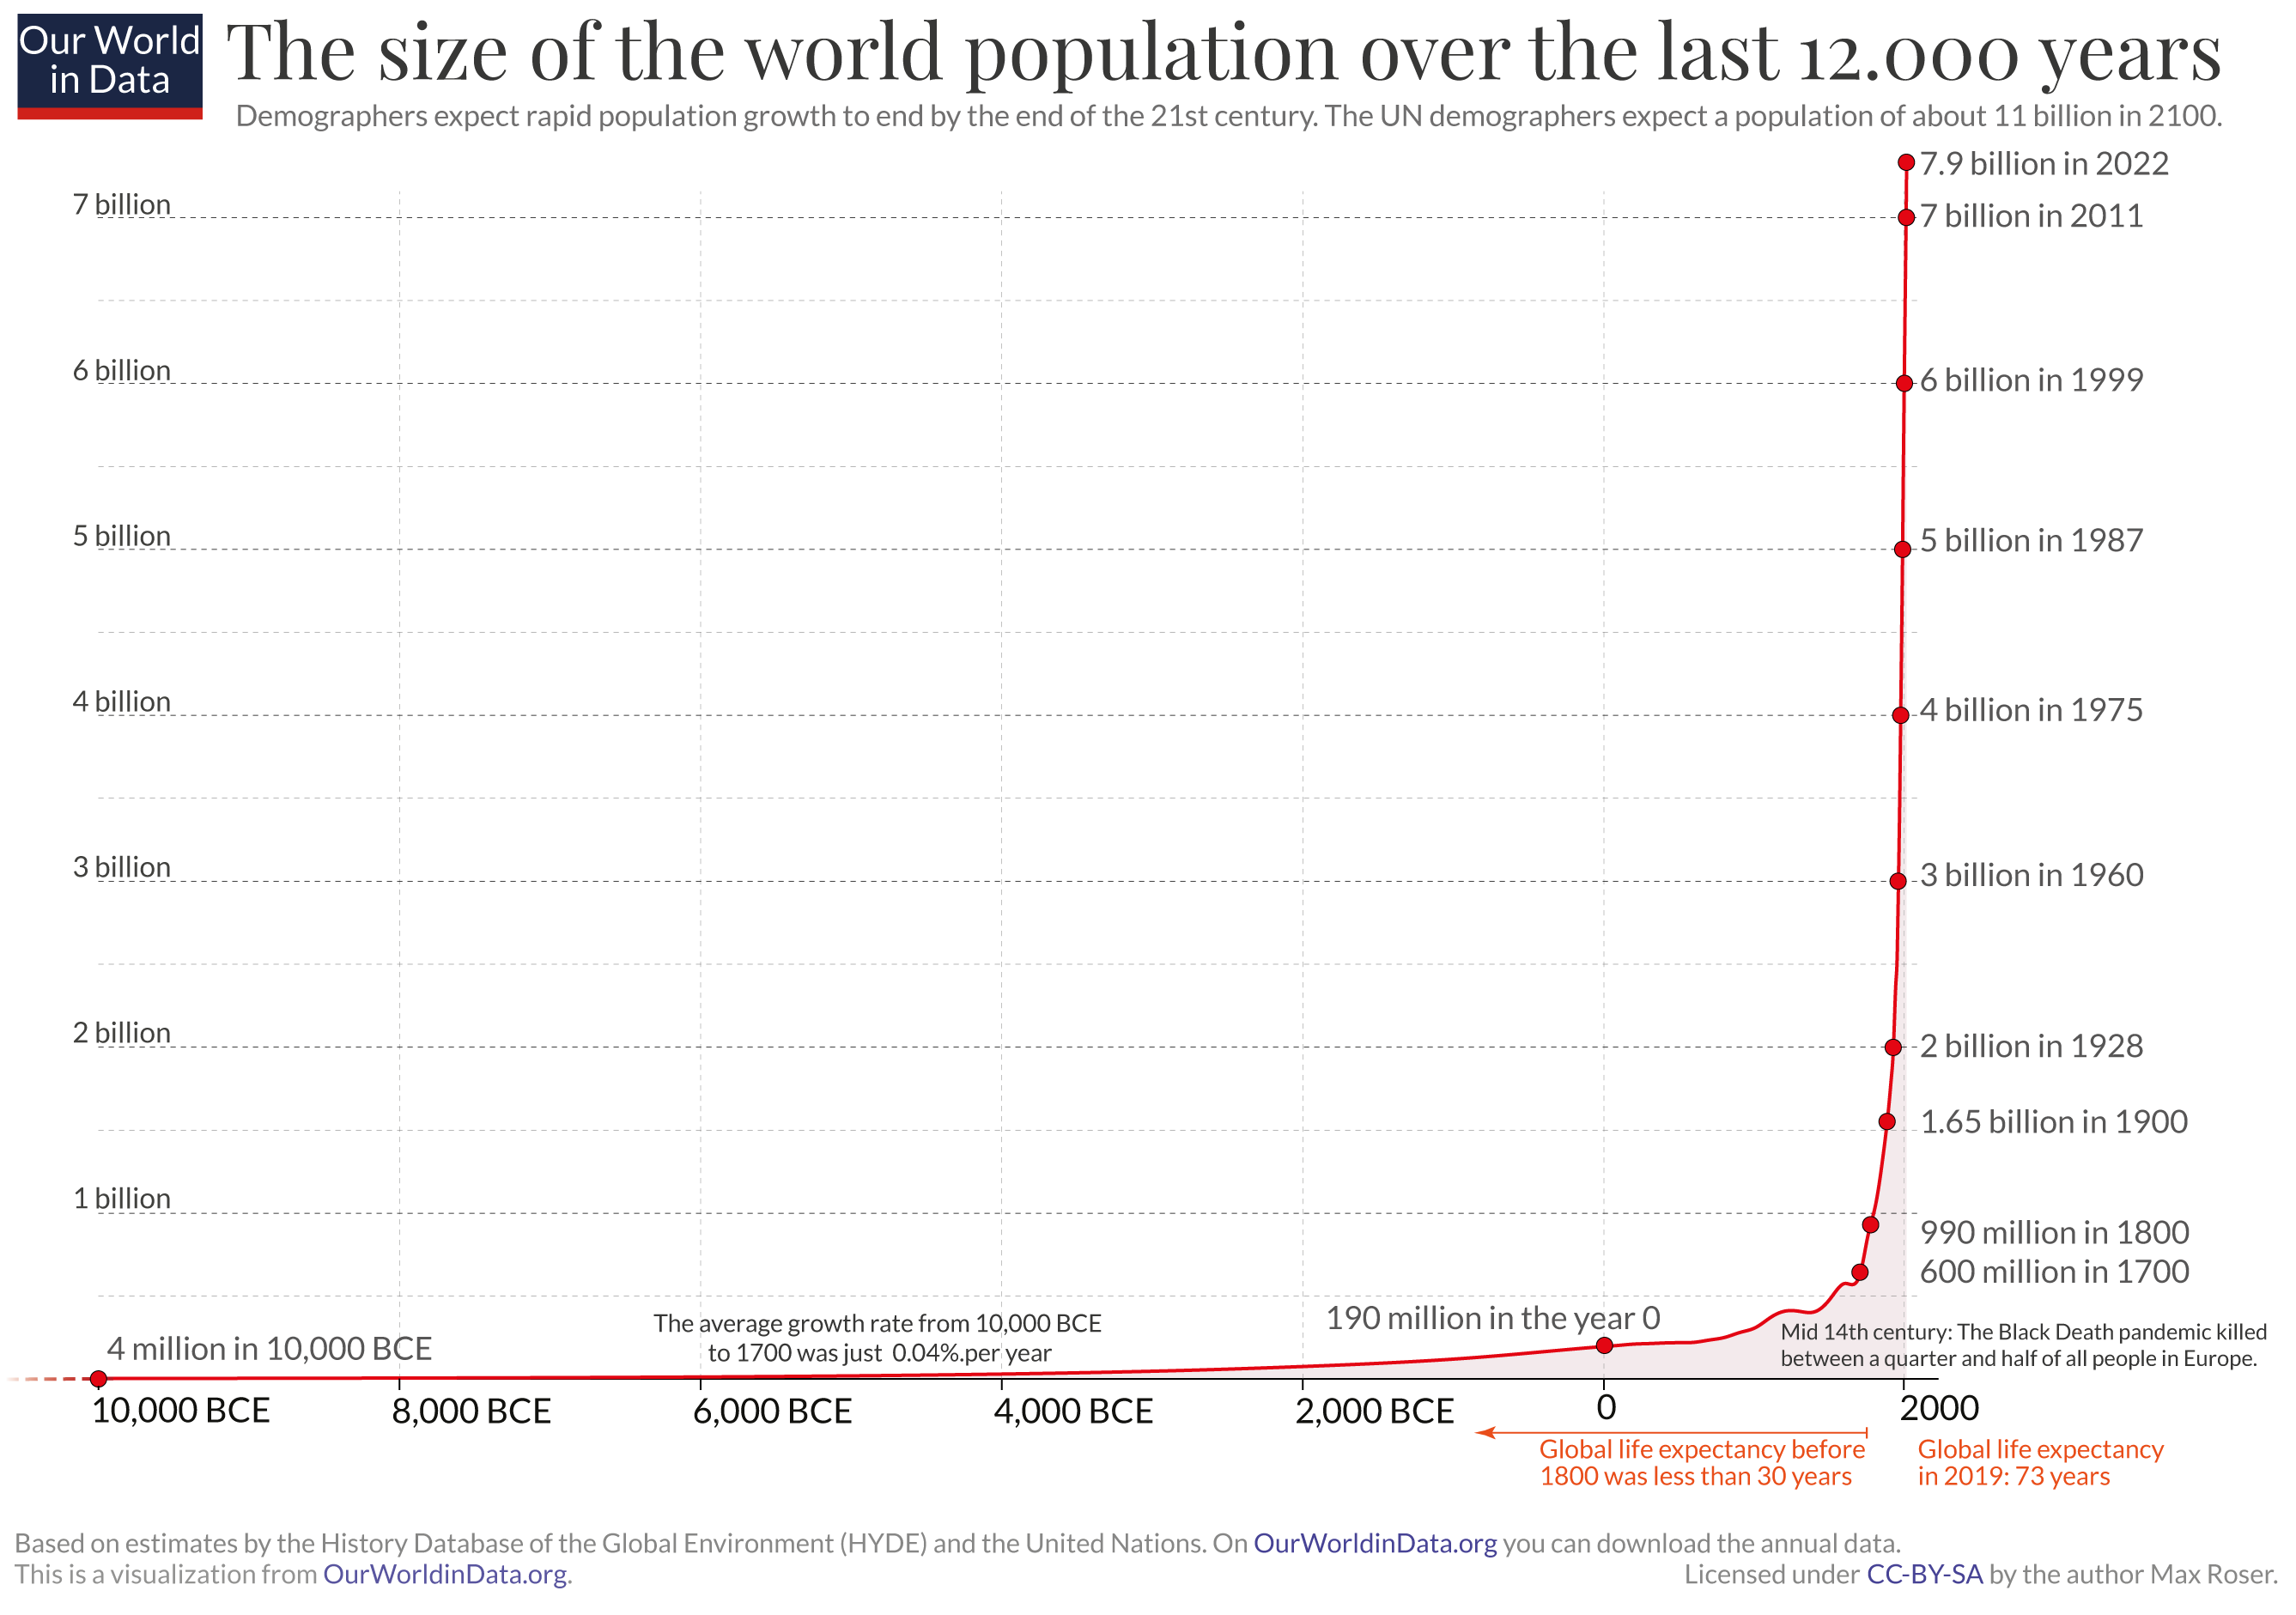 annual-world-population-since-10-thousand-bce.png